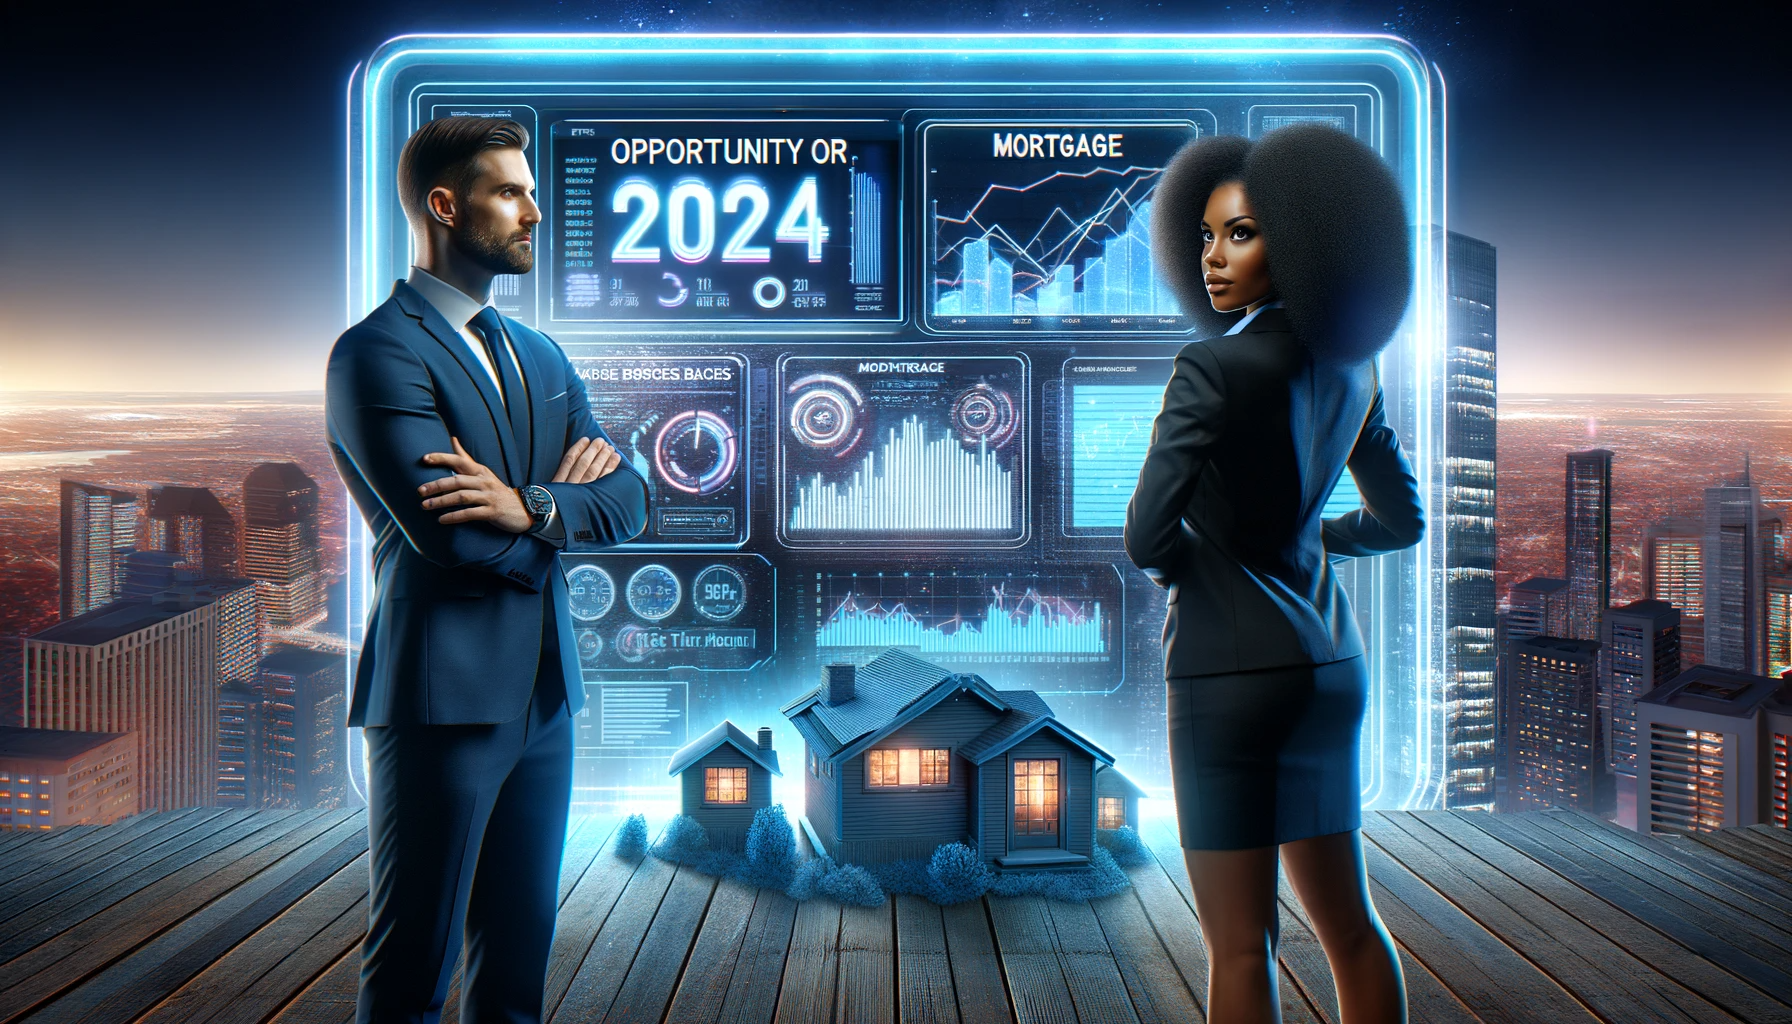 Mortgage Pros: 25 Tactics to Catapult a 2024 Comeback